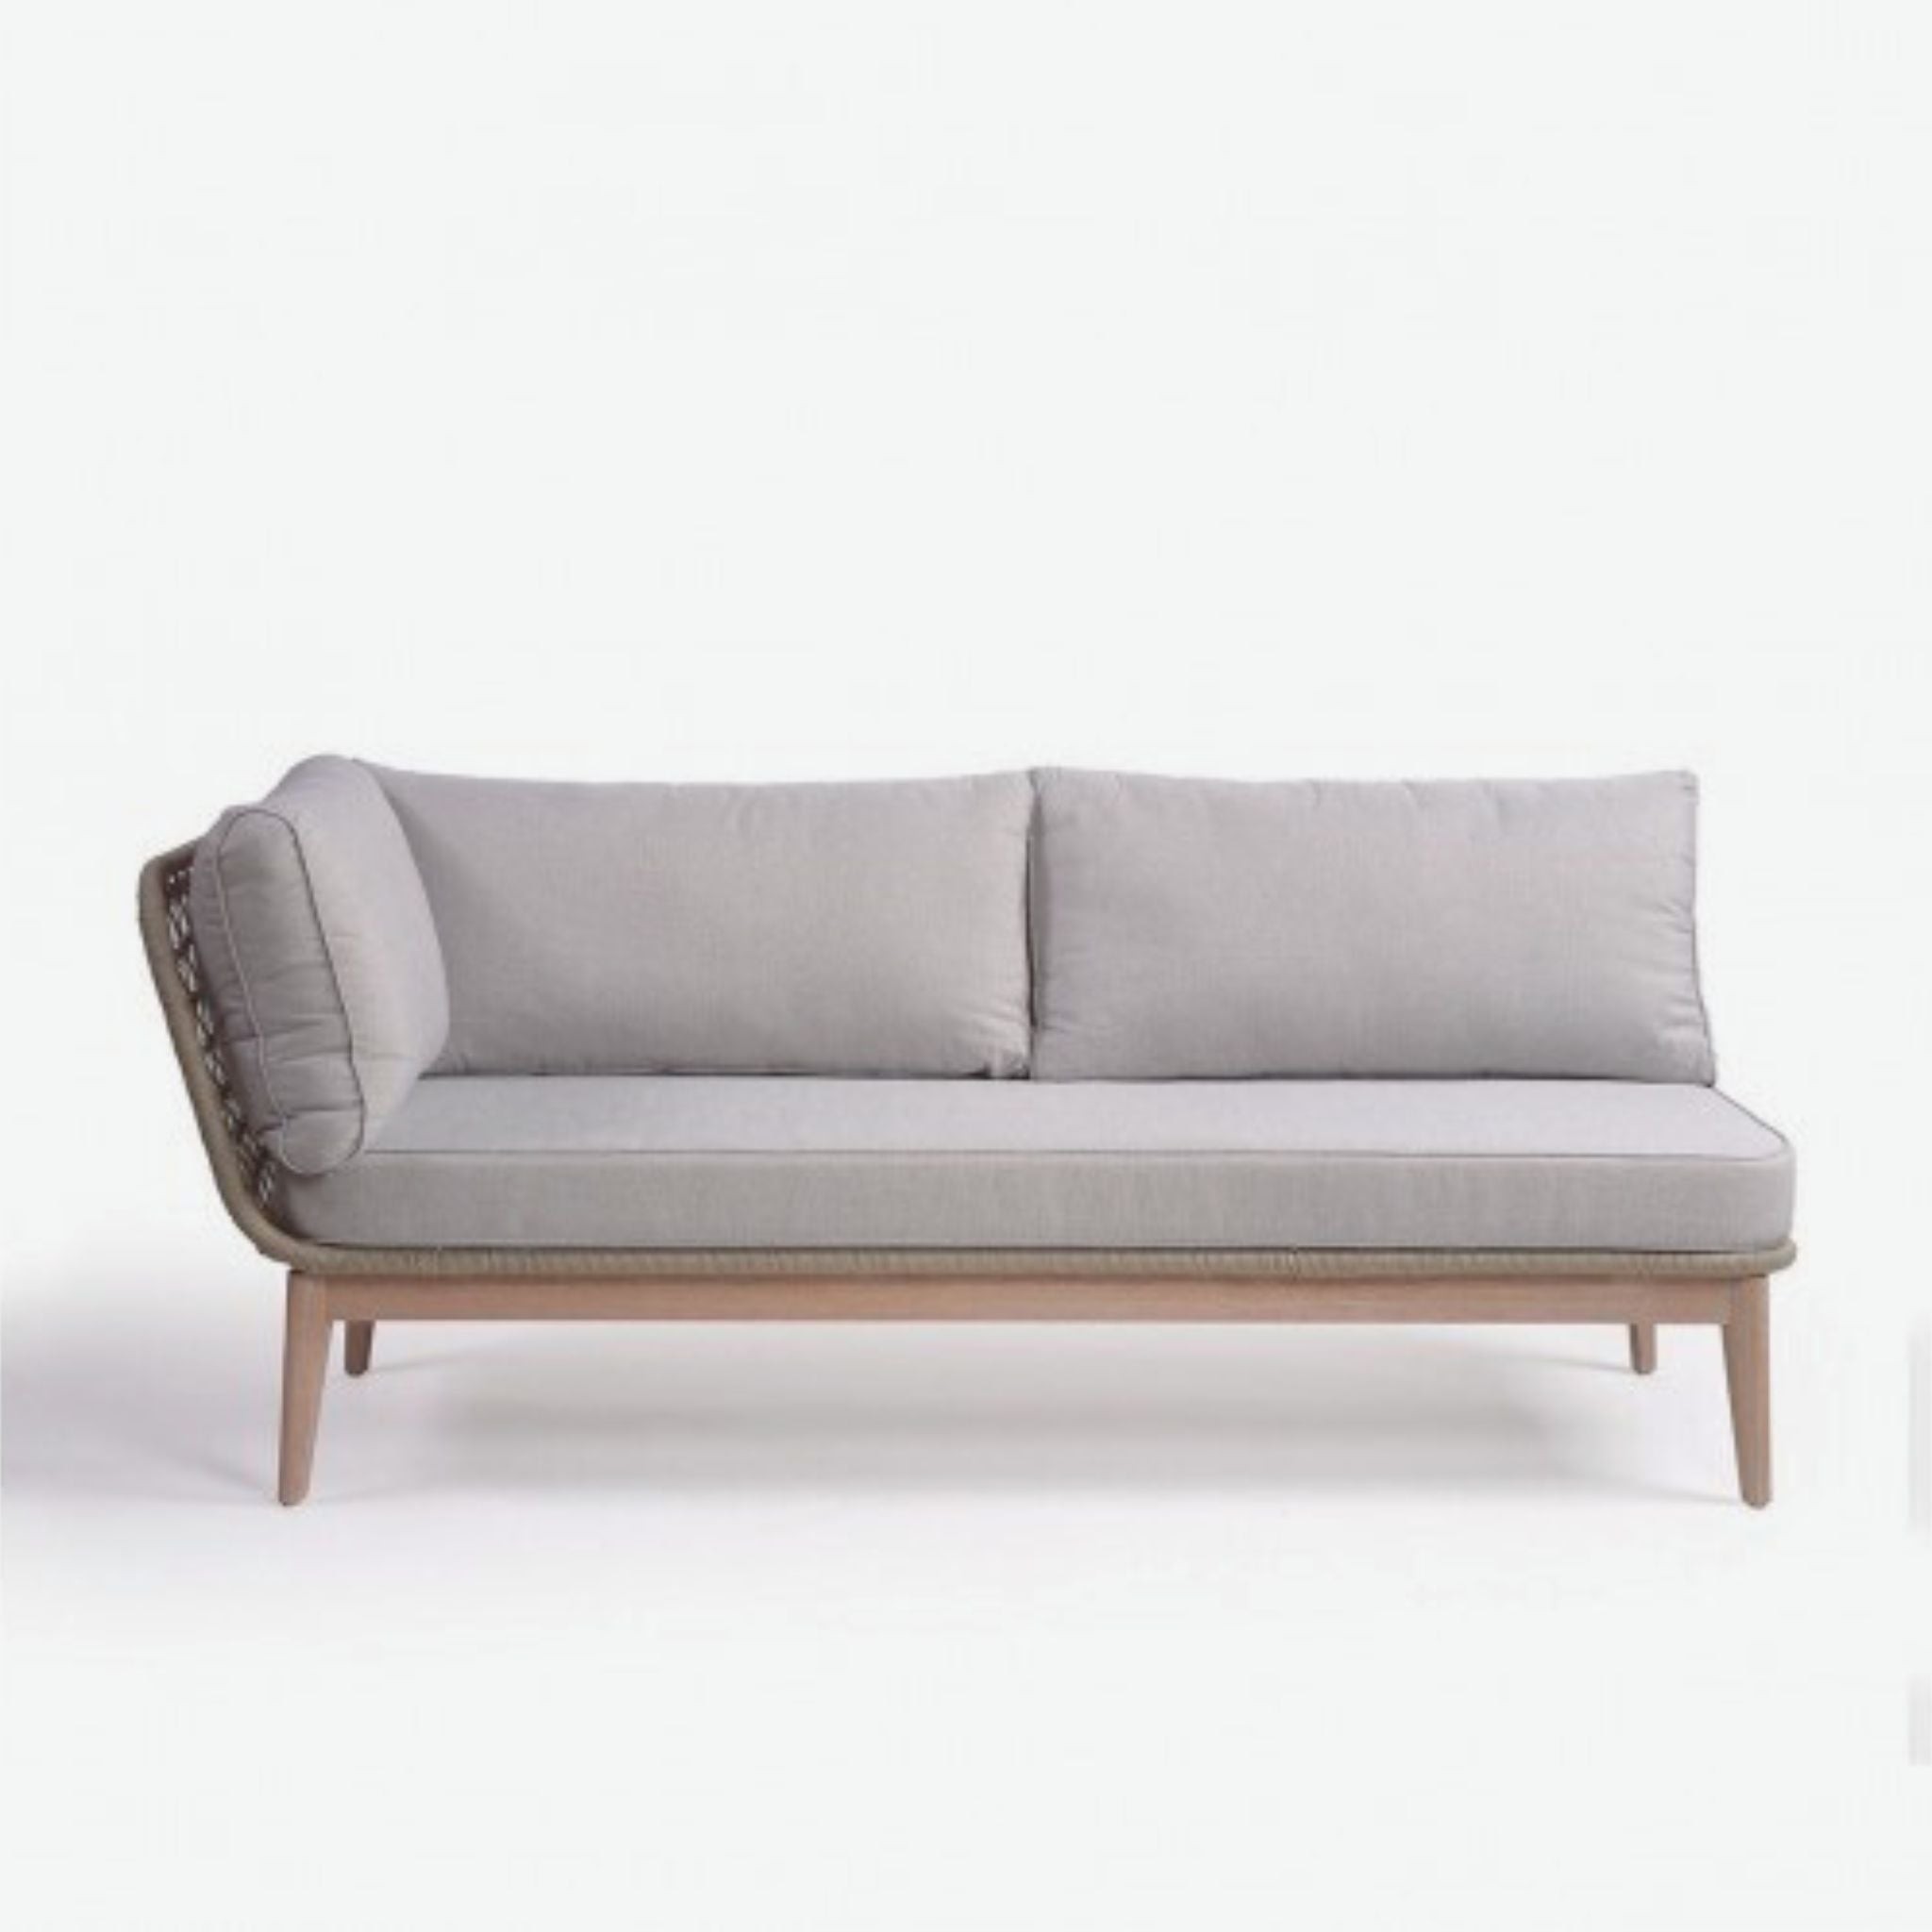 Crisal Decoracion Osana-2C Outdoor Sofa with One Arm Wood and Cement Colour Rope - ModernistaLiving